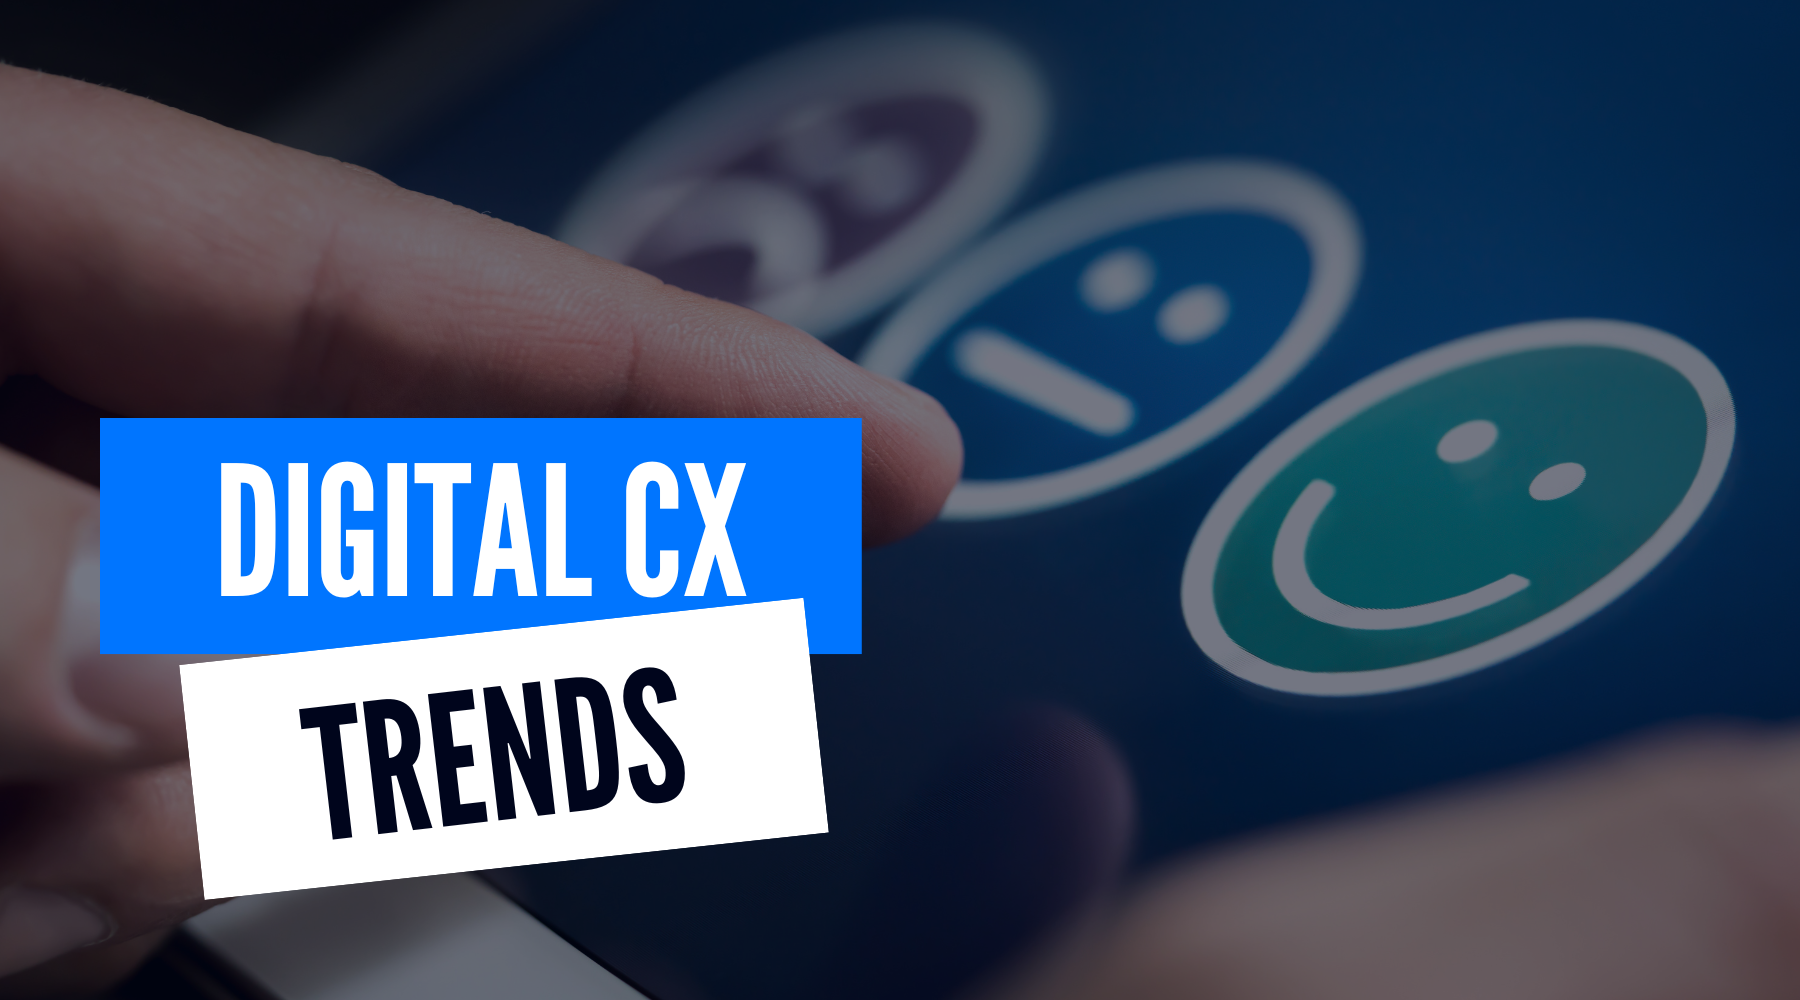 Digital CX Trends Blog Featured Image